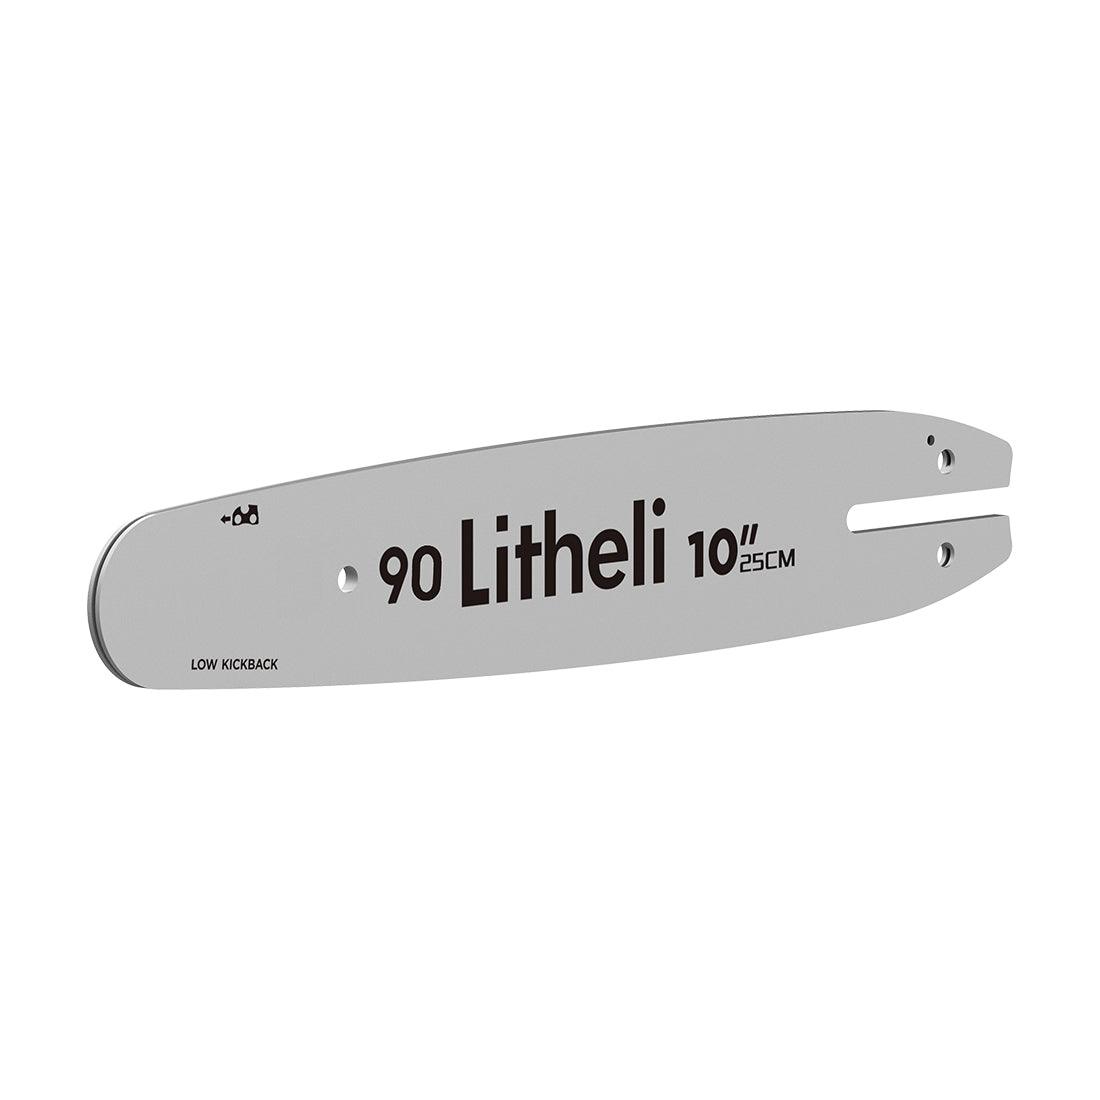 Litheli 10-Inch Replacement Pole Saw Guide Bar